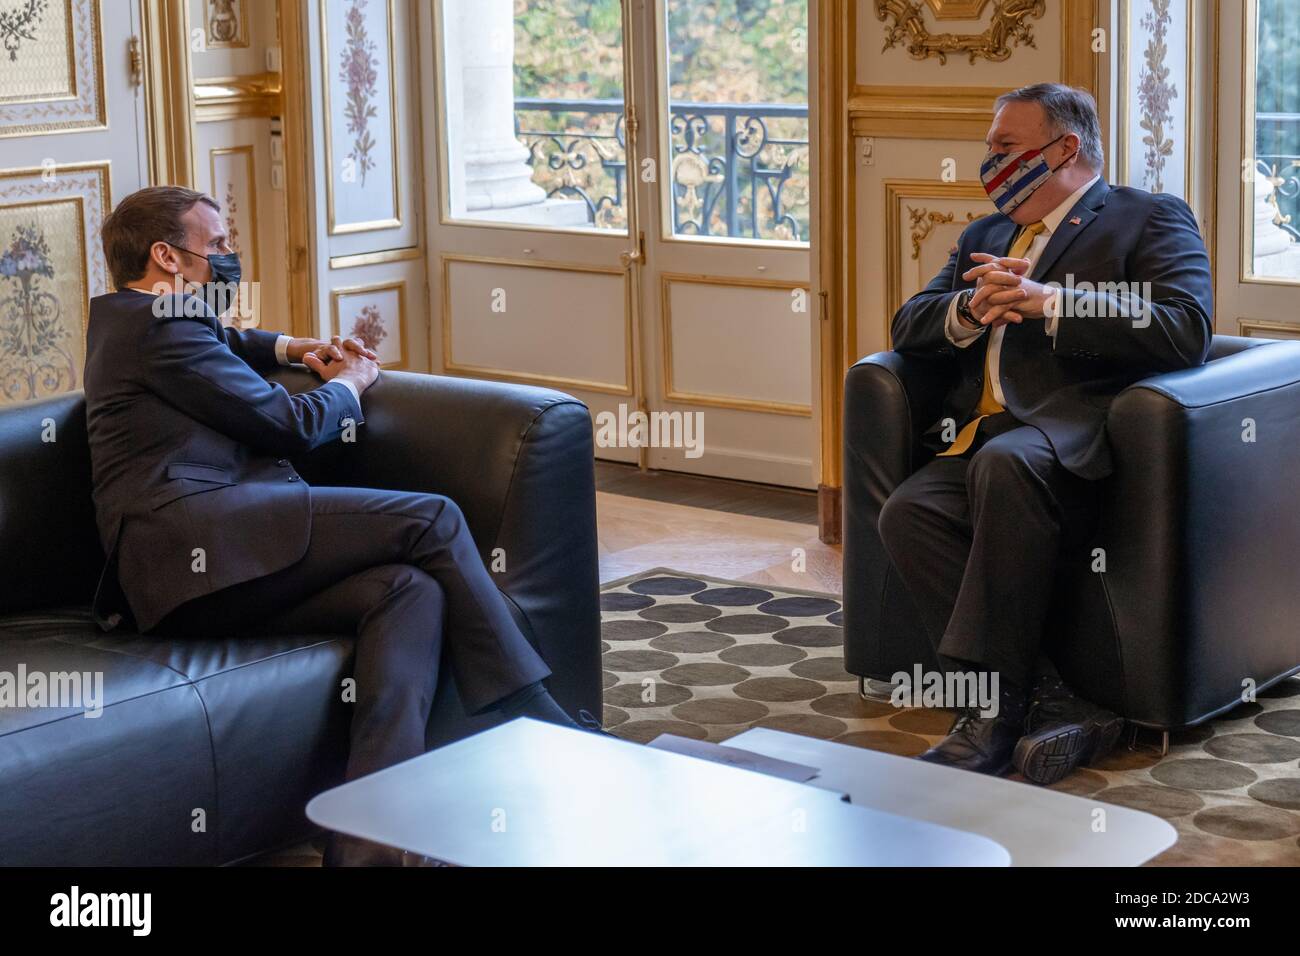 PARIS, FRANCE - 16 November 2020 - US Secretary of State Michael R. Pompeo bids farewell to French President Emmanuel Macron following their meeting i Stock Photo